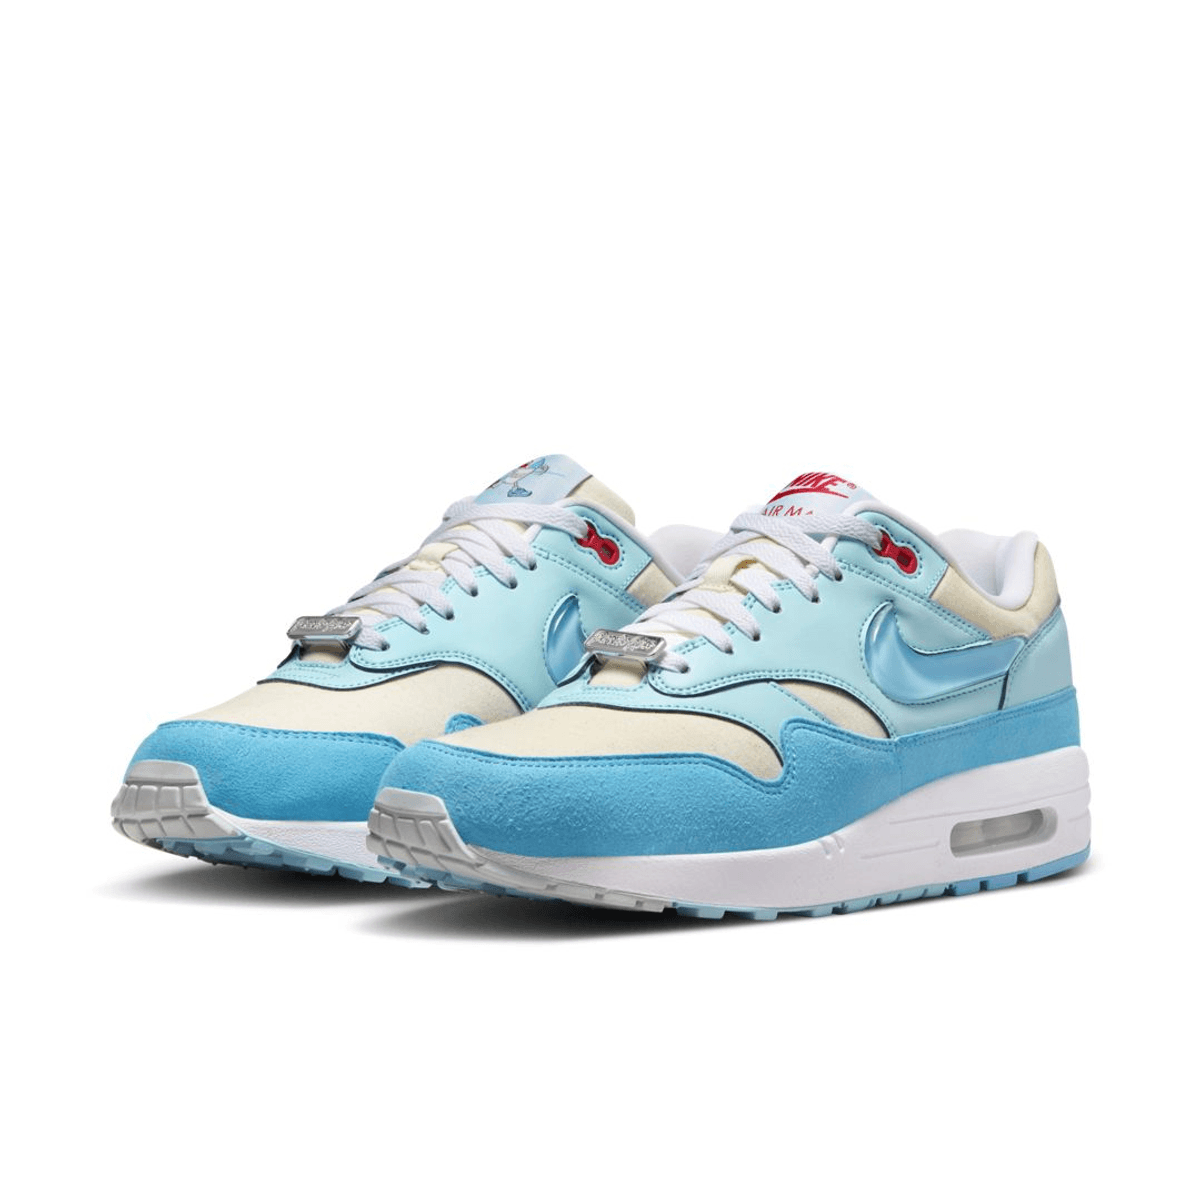 Nike Air Max Puerto Rico "Blue Gale" To Release July 27th